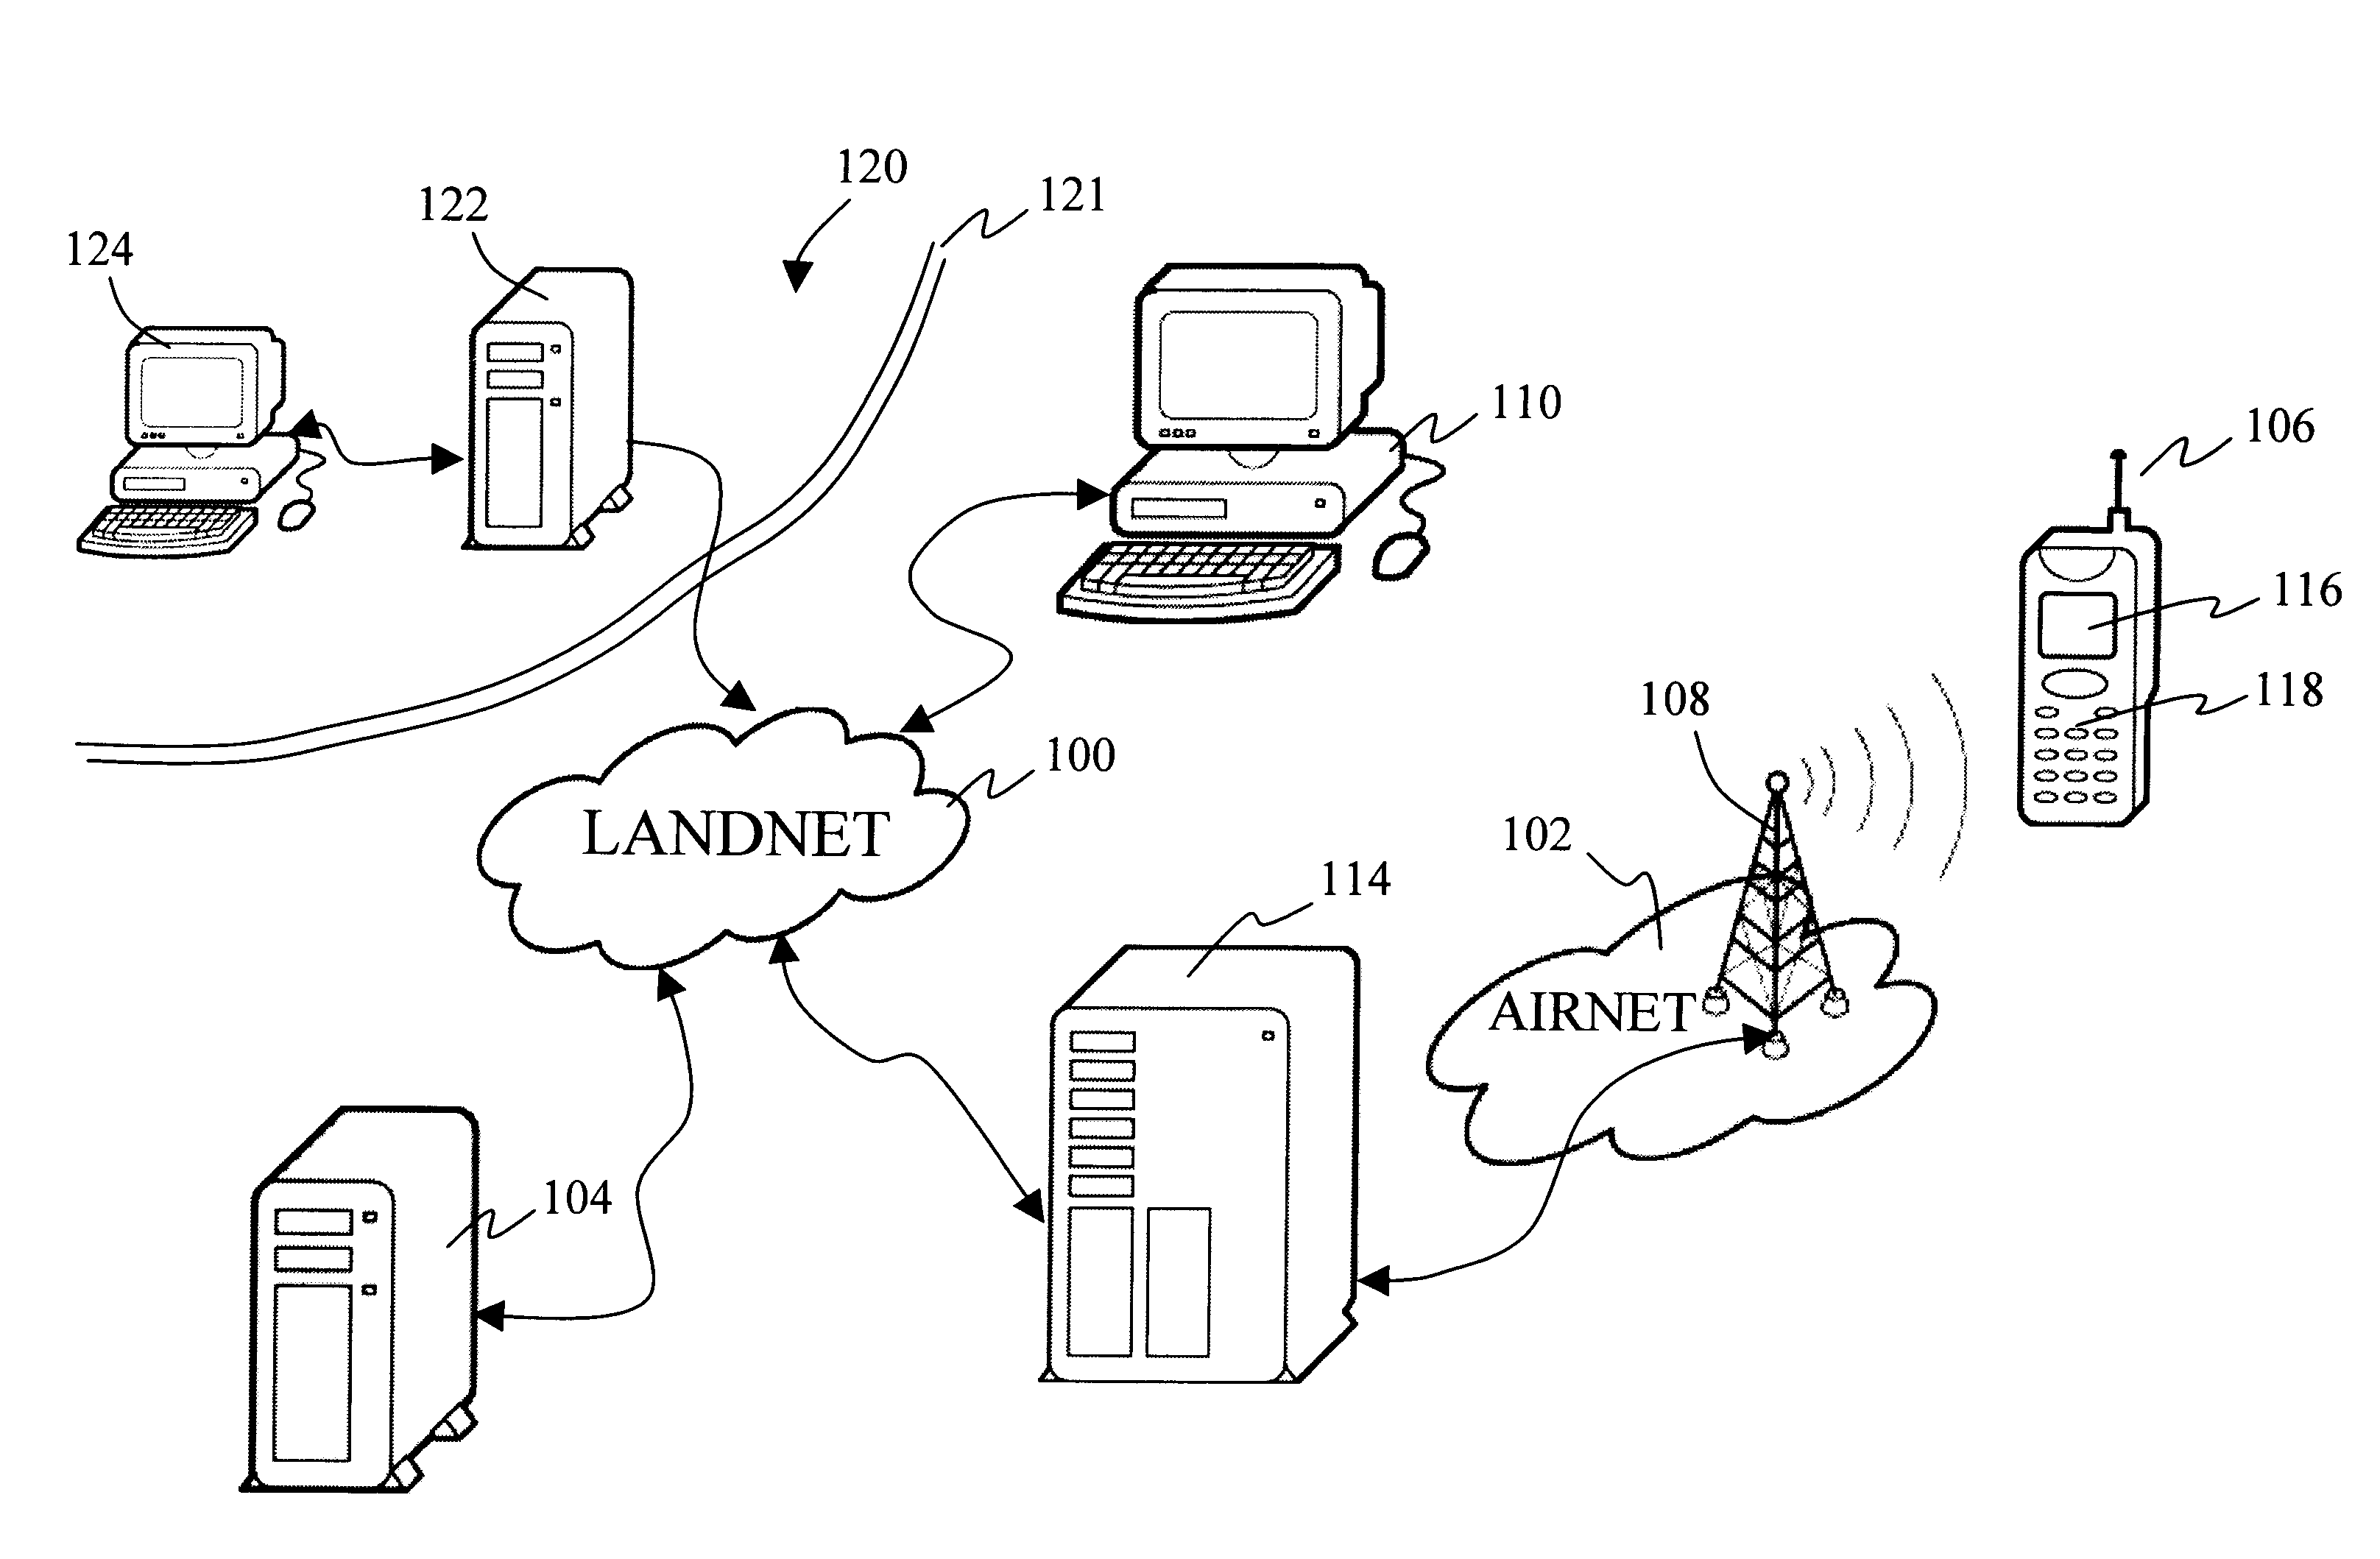 Method and architecture for managing a fleet of mobile stations over wireless data networks